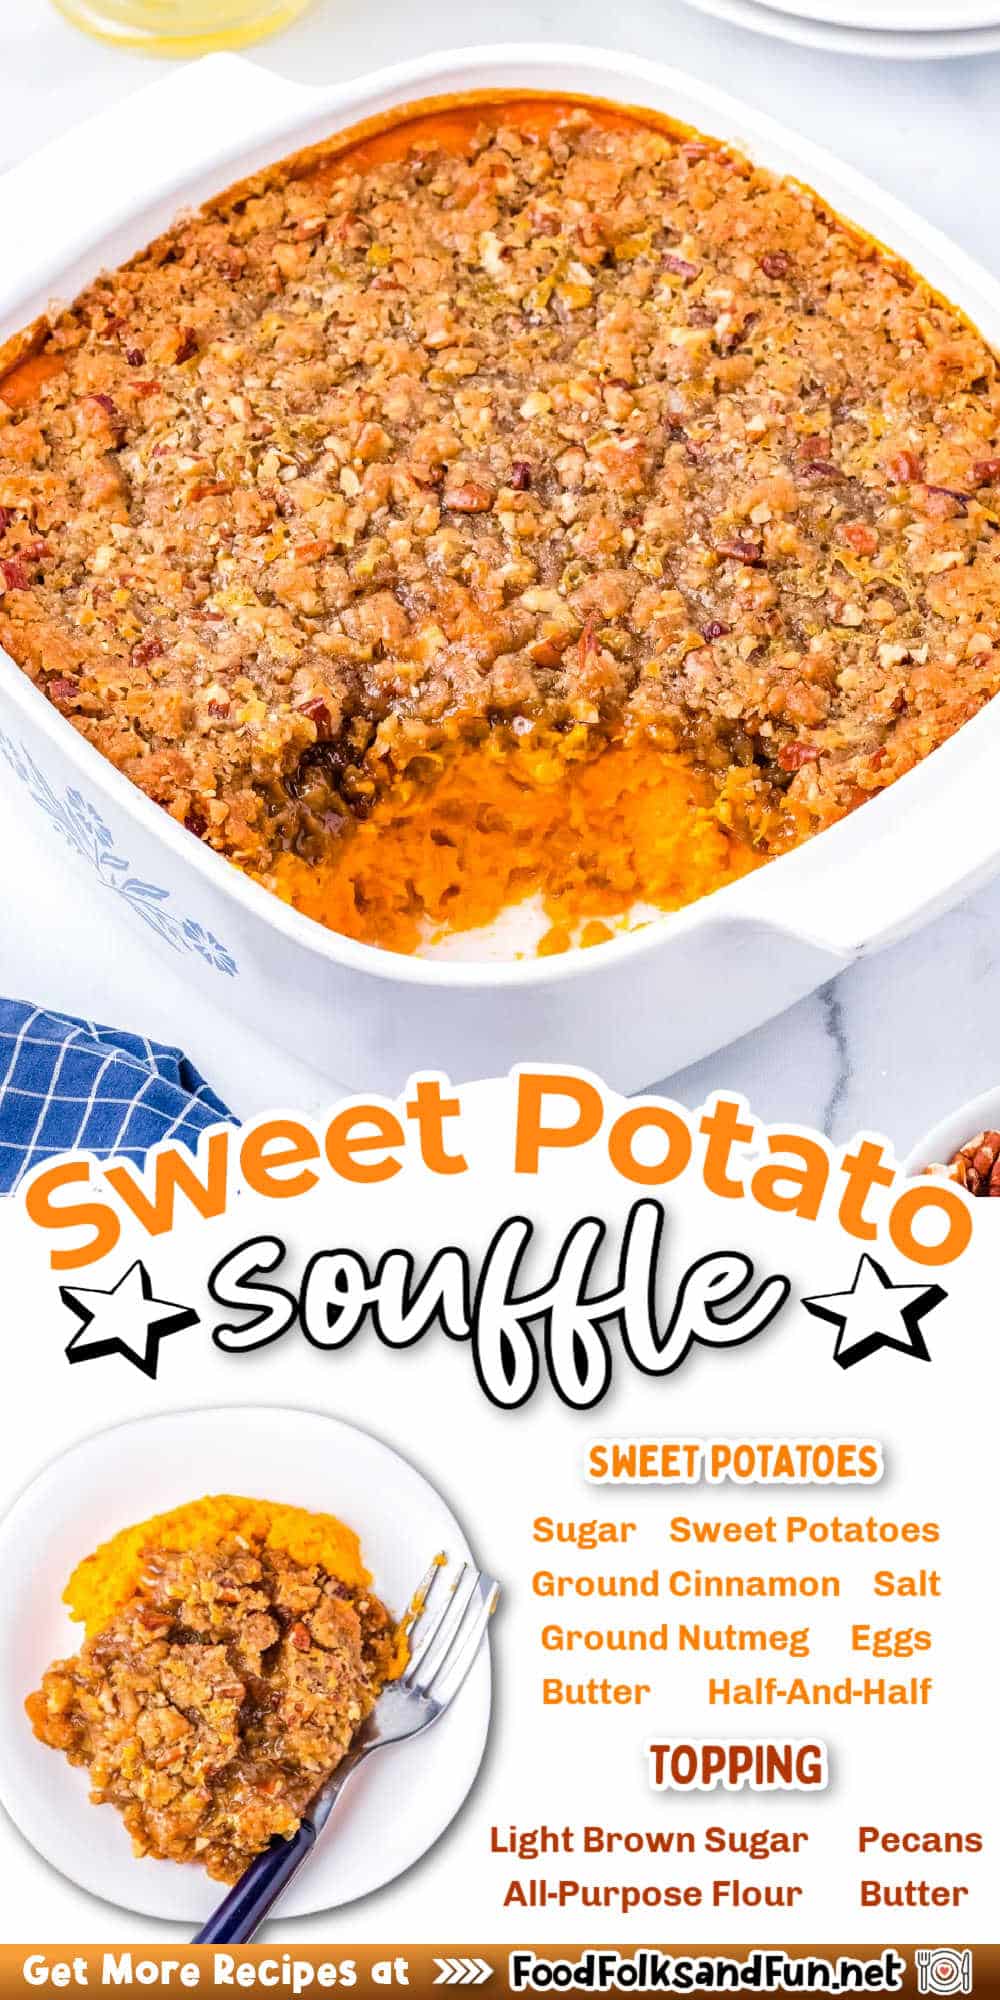 This Sweet Potato Soufflé recipe is the best way to eat sweet potatoes. It's creamy and has a buttery pecan streusel topping. I always get rave reviews when I make it!  via @foodfolksandfun